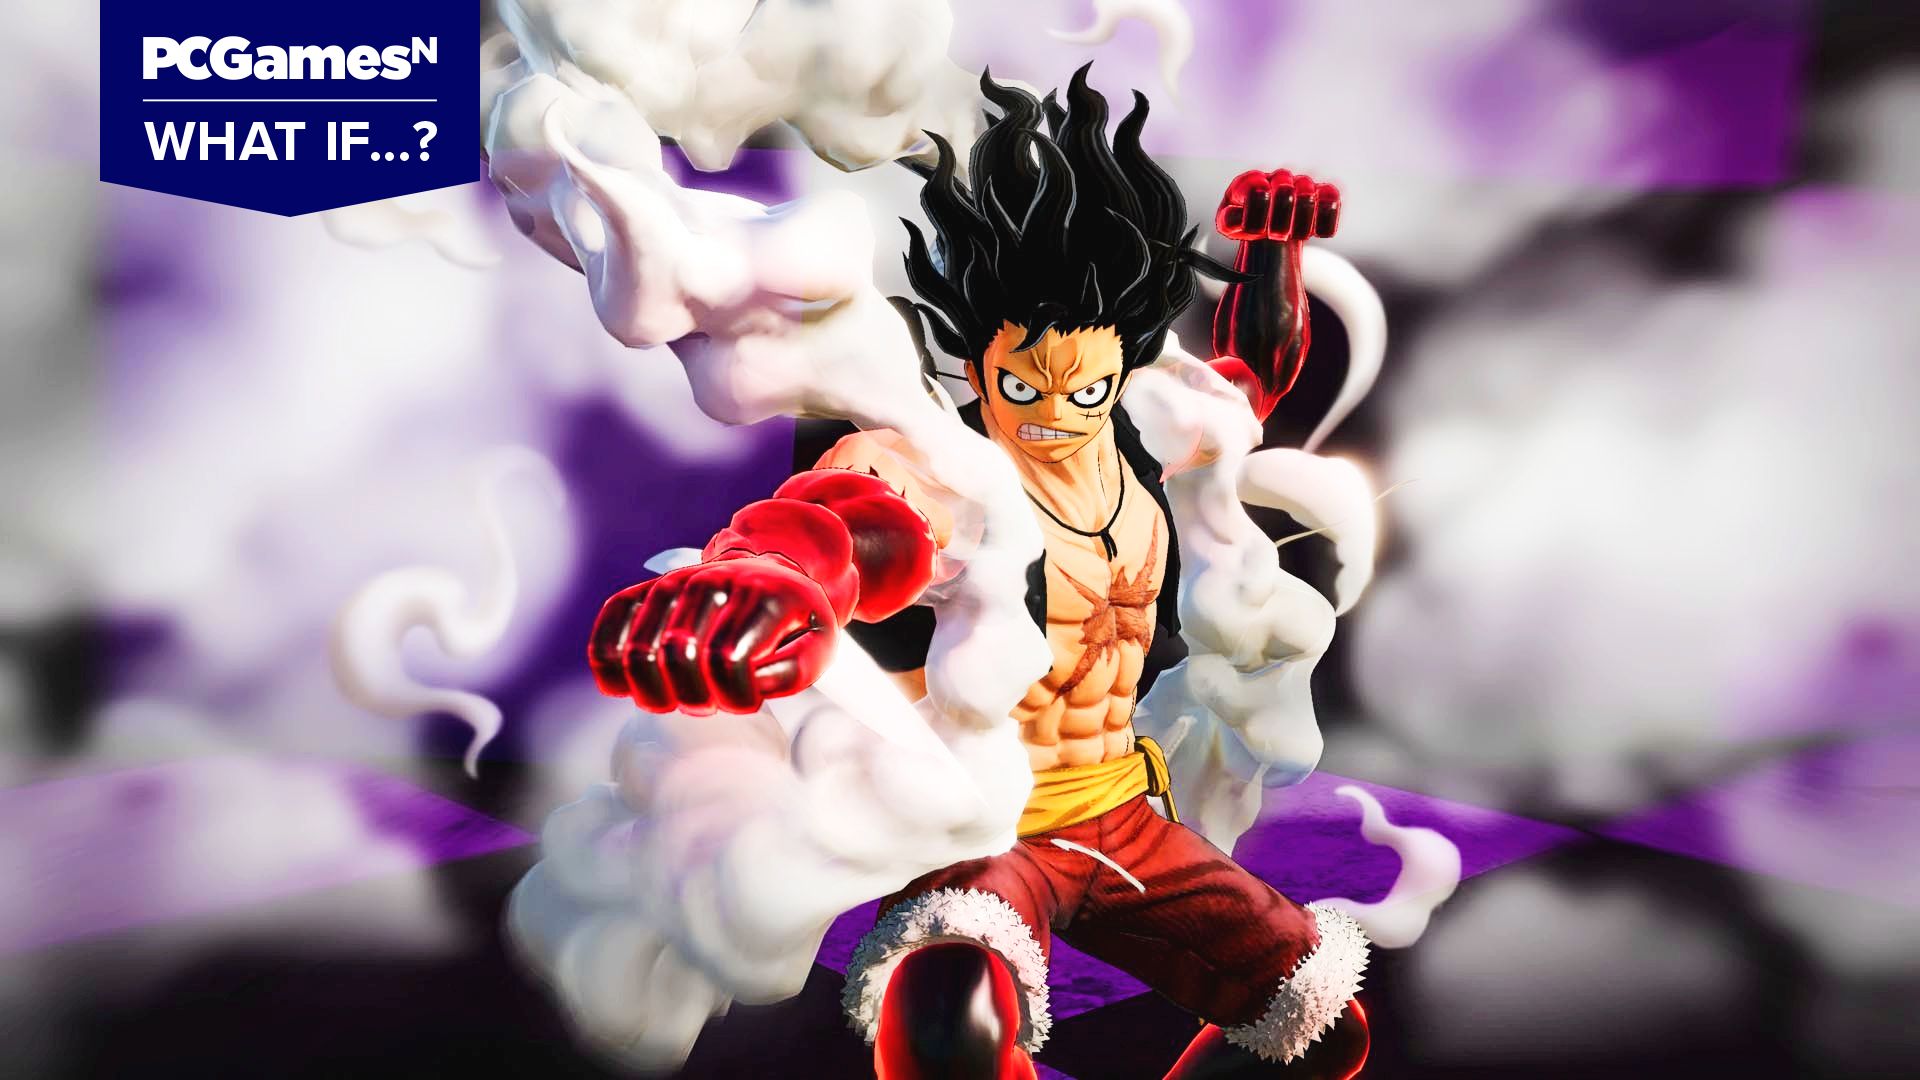 One Piece and Dragon Ball Z once saw an amazing fighting game